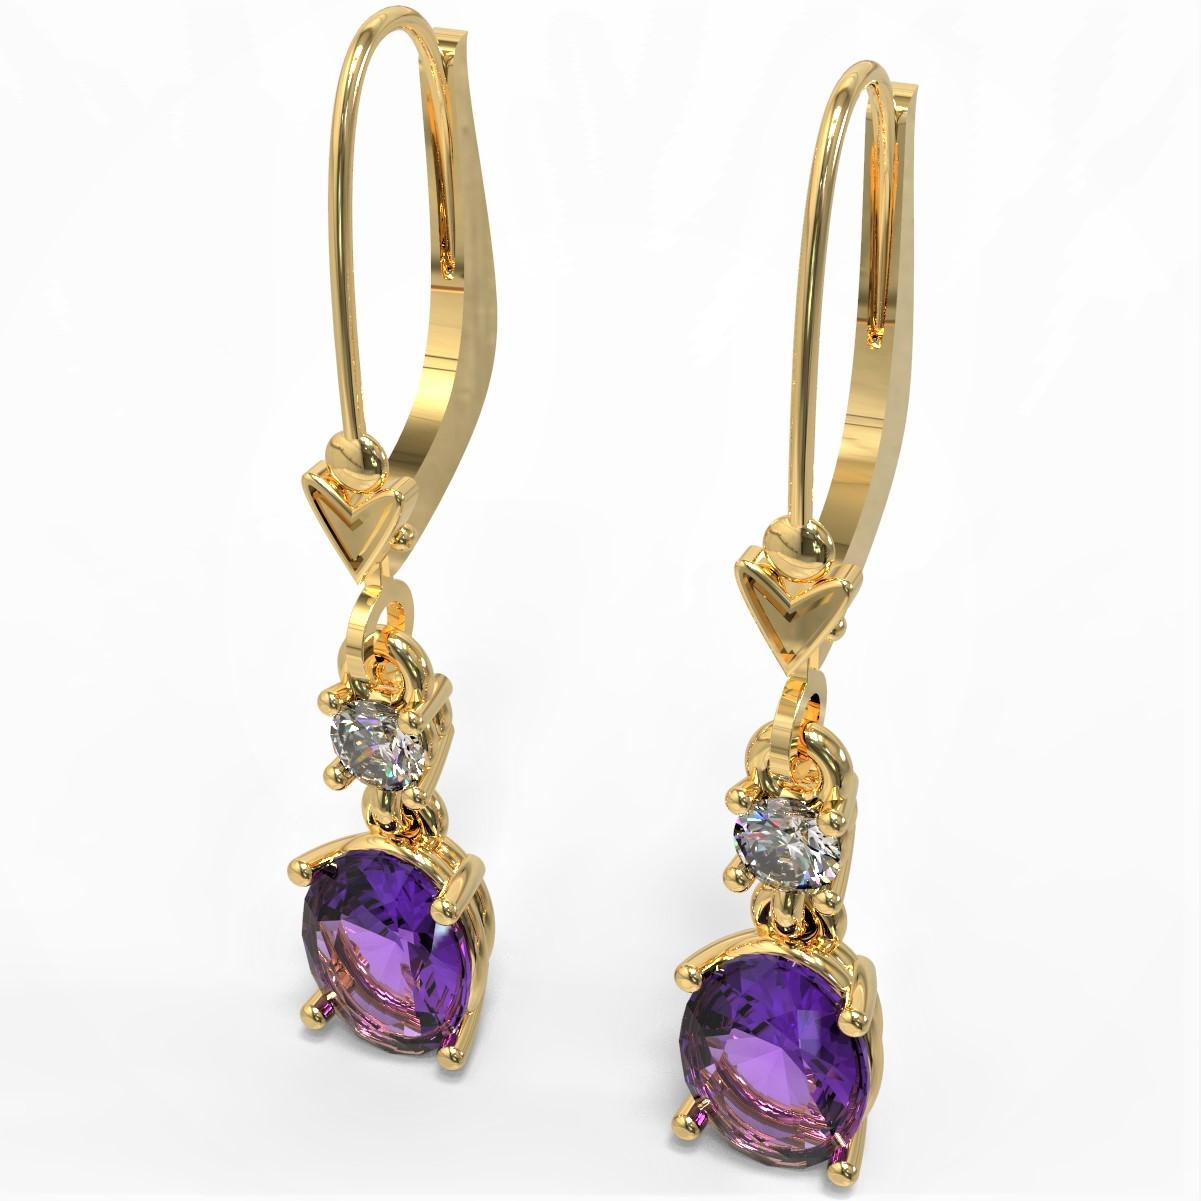 Kian Design 2.2 Carat Oval Amethyst Round Diamond Earrings in 18 Carat Gold In New Condition For Sale In South Perth, AU